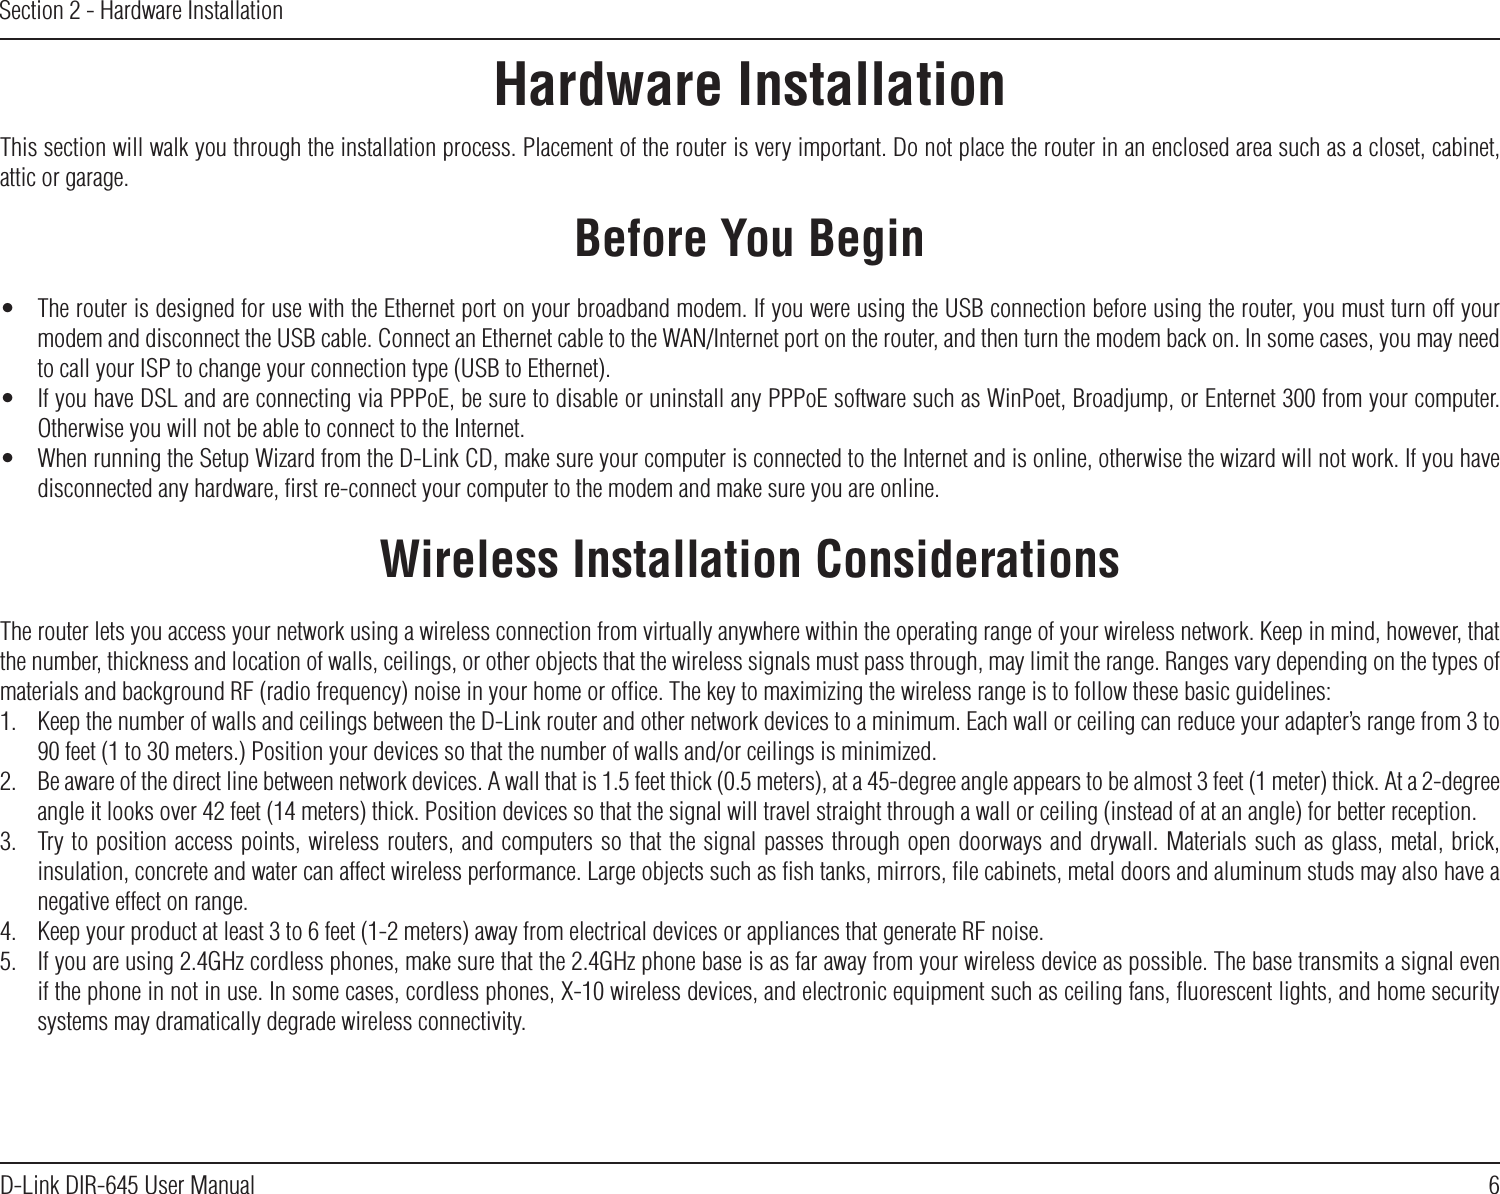 6D-Link DIR-645 User ManualSection 2 - Hardware InstallationHardware InstallationBefore You BeginWireless Installation ConsiderationsThis section will walk you through the installation process. Placement of the router is very important. Do not place the router in an enclosed area such as a closet, cabinet, attic or garage.The router lets you access your network using a wireless connection from virtually anywhere within the operating range of your wireless network. Keep in mind, however, that the number, thickness and location of walls, ceilings, or other objects that the wireless signals must pass through, may limit the range. Ranges vary depending on the types of materials and background RF (radio frequency) noise in your home or ofﬁce. The key to maximizing the wireless range is to follow these basic guidelines:1.  Keep the number of walls and ceilings between the D-Link router and other network devices to a minimum. Each wall or ceiling can reduce your adapter’s range from 3 to 90 feet (1 to 30 meters.) Position your devices so that the number of walls and/or ceilings is minimized.2.  Be aware of the direct line between network devices. A wall that is 1.5 feet thick (0.5 meters), at a 45-degree angle appears to be almost 3 feet (1 meter) thick. At a 2-degree angle it looks over 42 feet (14 meters) thick. Position devices so that the signal will travel straight through a wall or ceiling (instead of at an angle) for better reception.3.  Try to position access points, wireless routers, and computers so that the signal passes through open doorways and drywall. Materials such as glass, metal, brick, insulation, concrete and water can affect wireless performance. Large objects such as ﬁsh tanks, mirrors, ﬁle cabinets, metal doors and aluminum studs may also have a negative effect on range.4.  Keep your product at least 3 to 6 feet (1-2 meters) away from electrical devices or appliances that generate RF noise.5.  If you are using 2.4GHz cordless phones, make sure that the 2.4GHz phone base is as far away from your wireless device as possible. The base transmits a signal even if the phone in not in use. In some cases, cordless phones, X-10 wireless devices, and electronic equipment such as ceiling fans, ﬂuorescent lights, and home security systems may dramatically degrade wireless connectivity.•  The router is designed for use with the Ethernet port on your broadband modem. If you were using the USB connection before using the router, you must turn off your modem and disconnect the USB cable. Connect an Ethernet cable to the WAN/Internet port on the router, and then turn the modem back on. In some cases, you may need to call your ISP to change your connection type (USB to Ethernet).•  If you have DSL and are connecting via PPPoE, be sure to disable or uninstall any PPPoE software such as WinPoet, Broadjump, or Enternet 300 from your computer. Otherwise you will not be able to connect to the Internet.•  When running the Setup Wizard from the D-Link CD, make sure your computer is connected to the Internet and is online, otherwise the wizard will not work. If you have disconnected any hardware, ﬁrst re-connect your computer to the modem and make sure you are online.